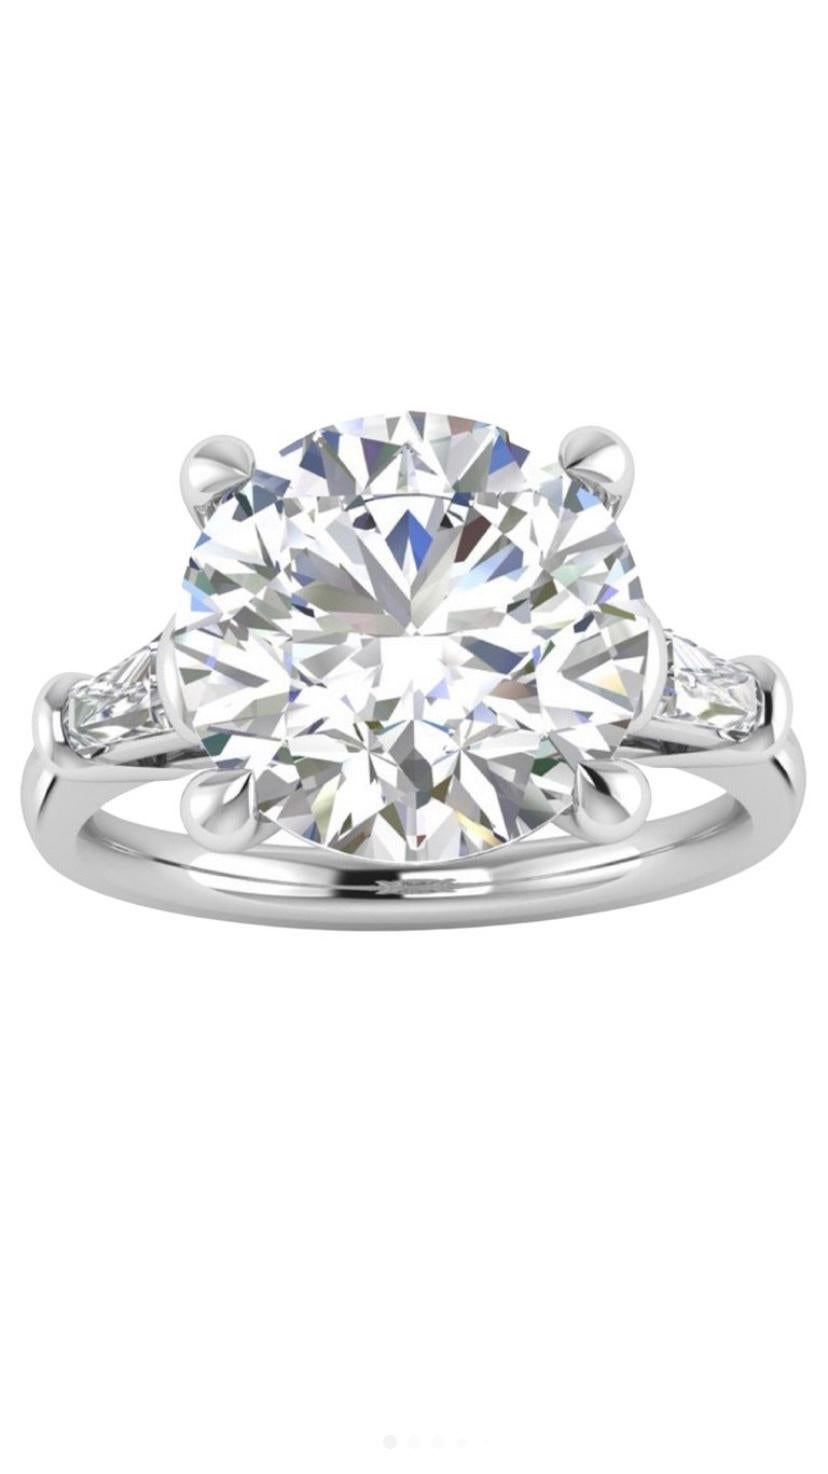 Round Cut IGI Certified 5 Ct of Diamond on Solitaire Ring For Sale